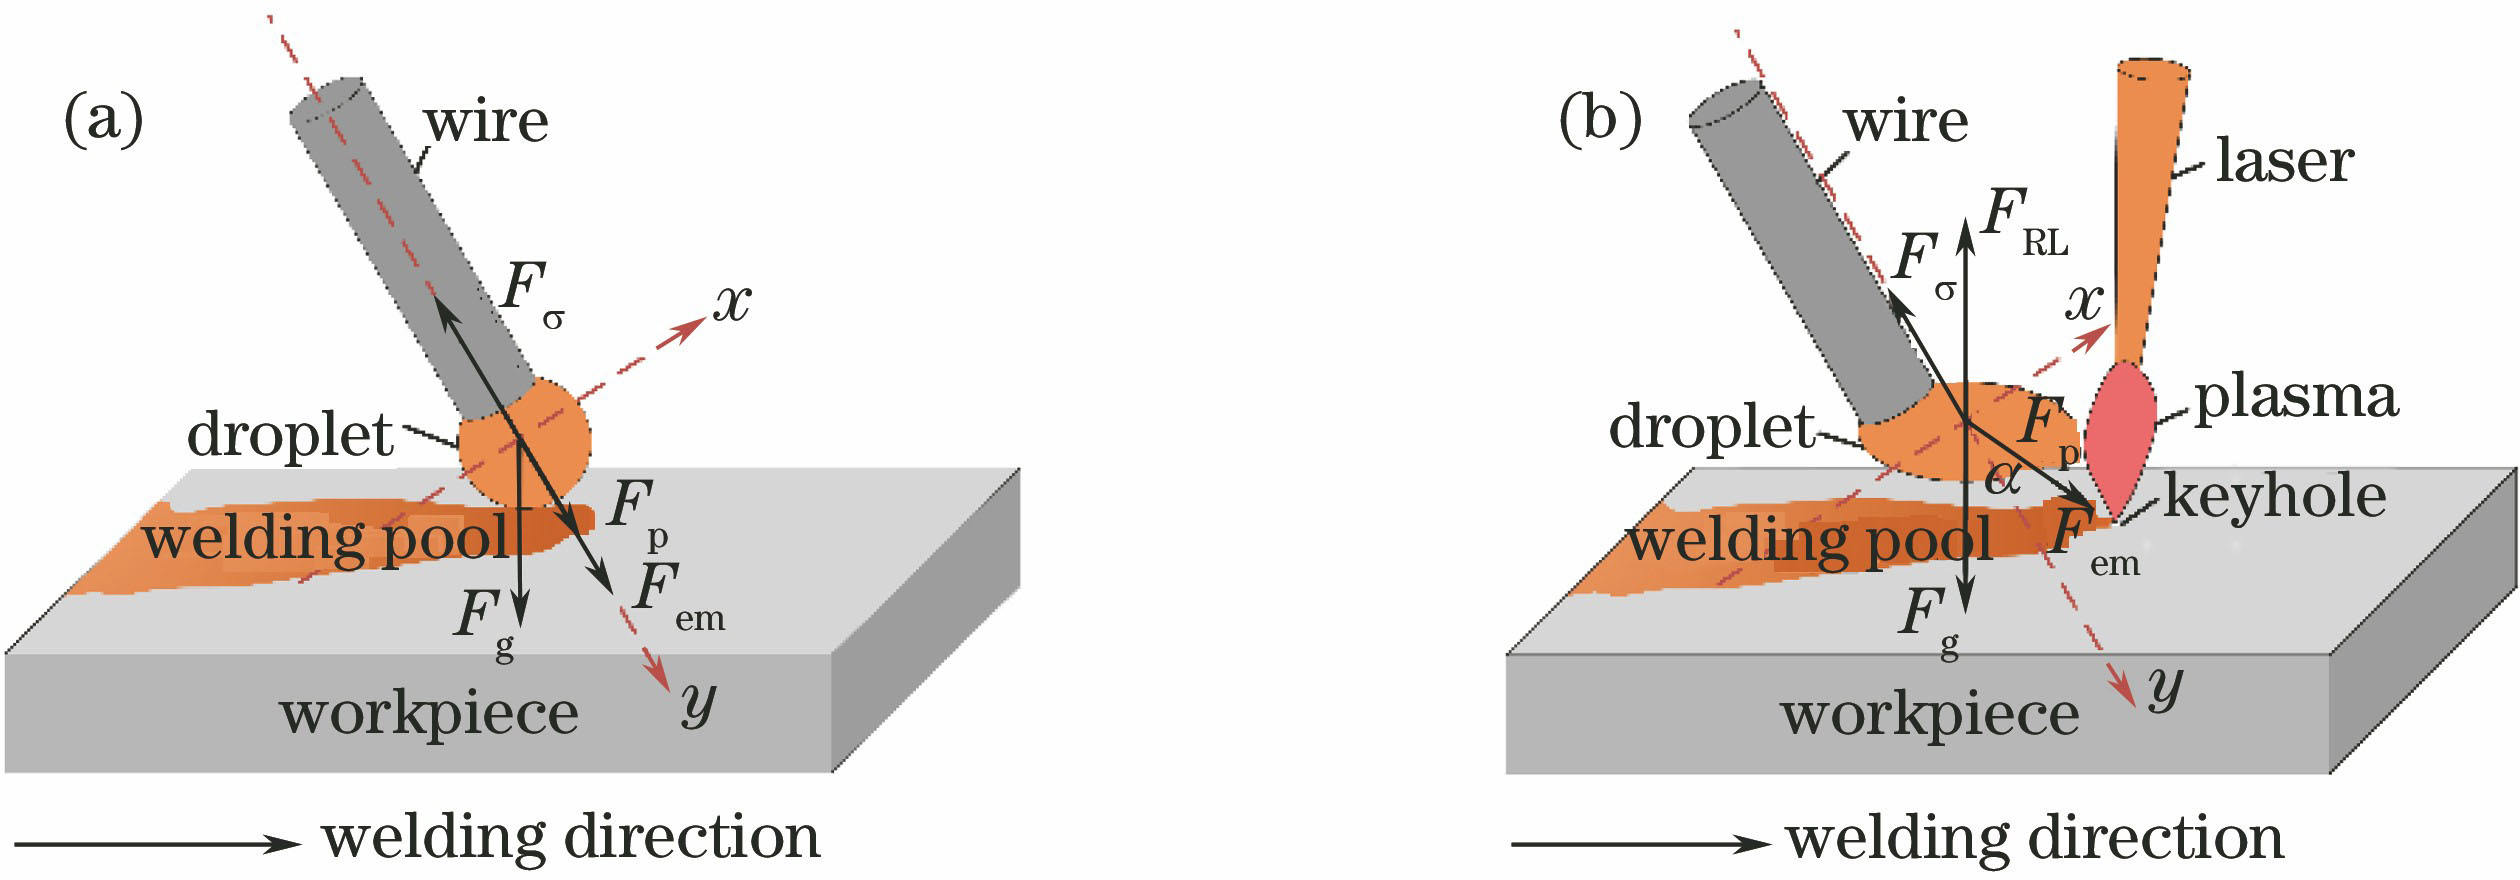 Schematic of force acting on droplets. (a) MAG welding; (b) laser-MAG hybrid welding